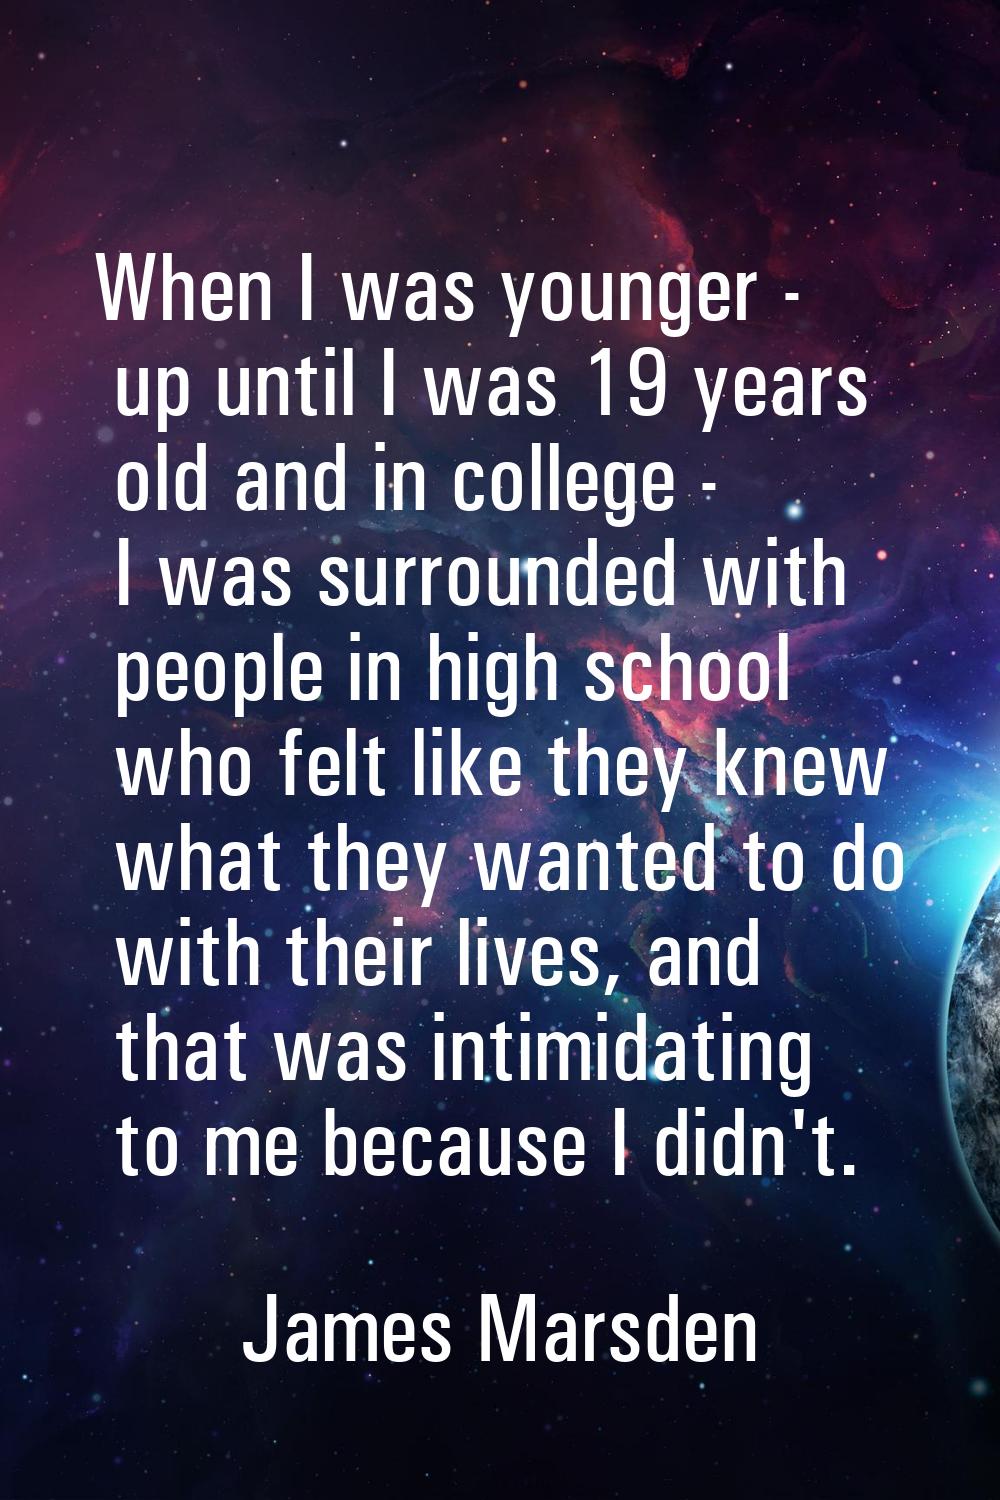 When I was younger - up until I was 19 years old and in college - I was surrounded with people in h